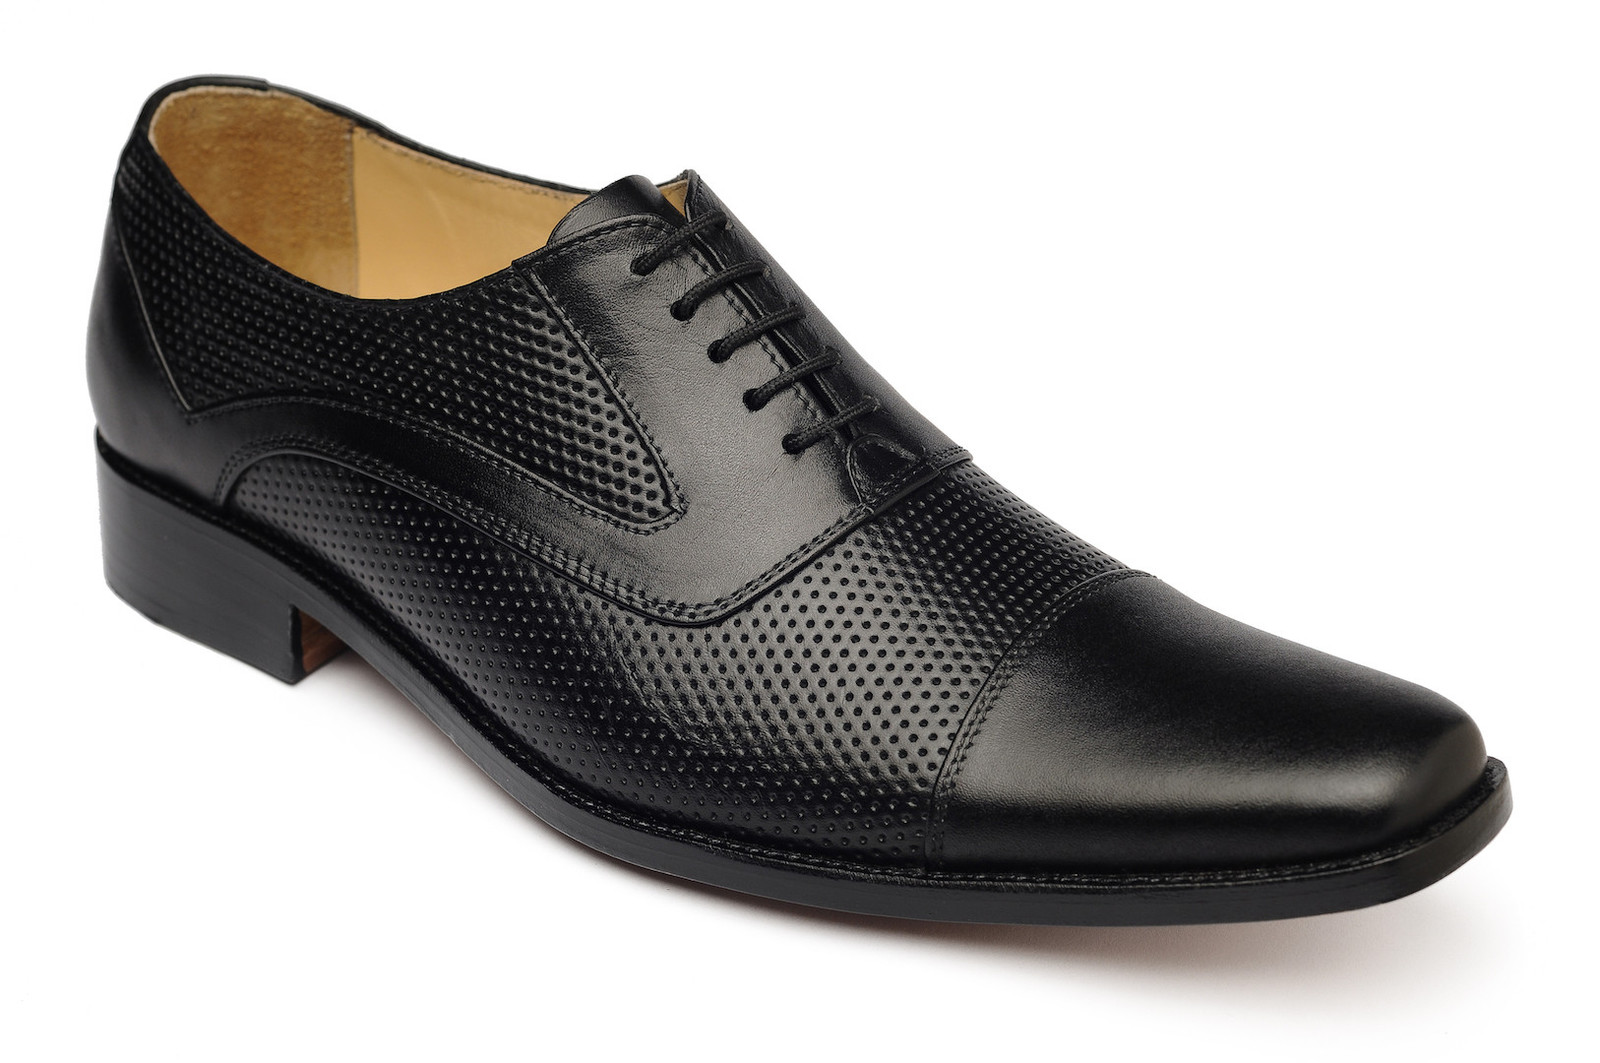 HANDMADE BLACK OXFORD PERFORATED SHOES, MEN'S BLACK DRESS SHOES, REAL ...